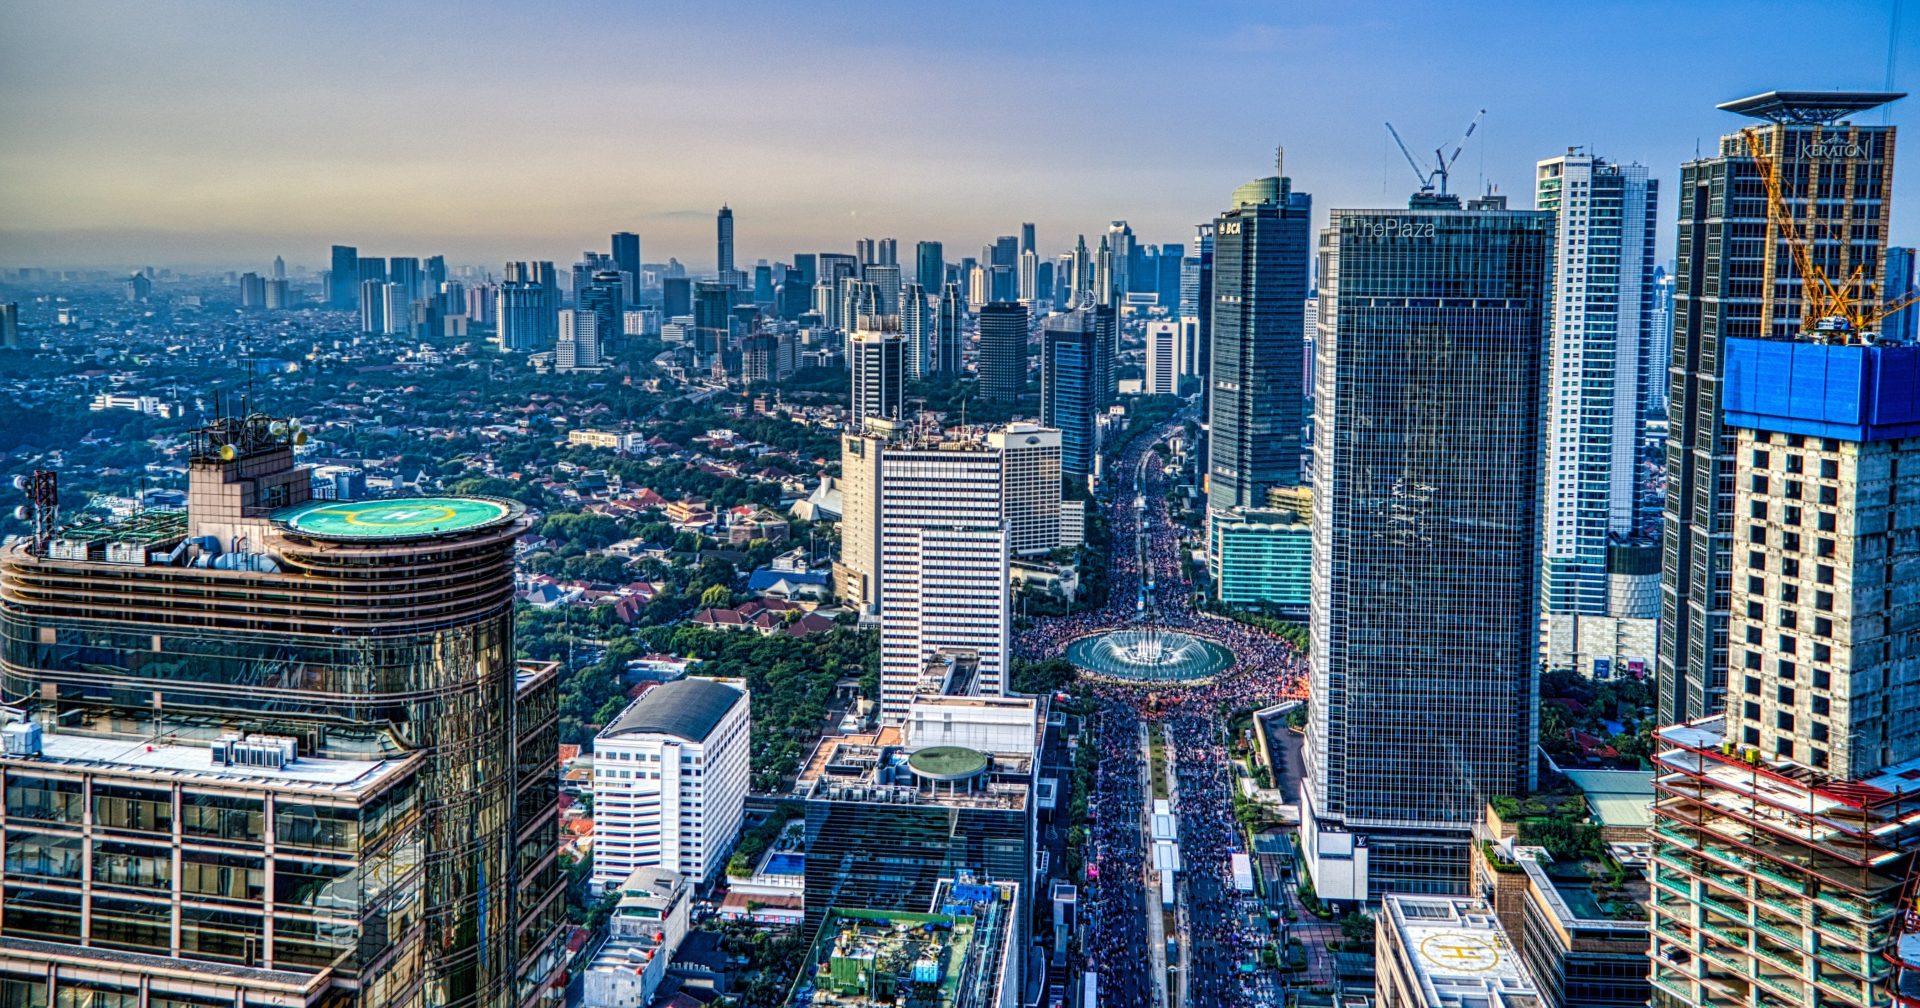 Top Five Smartphone Brands in Indonesia Captured a Record 84% Share During Q3 2019